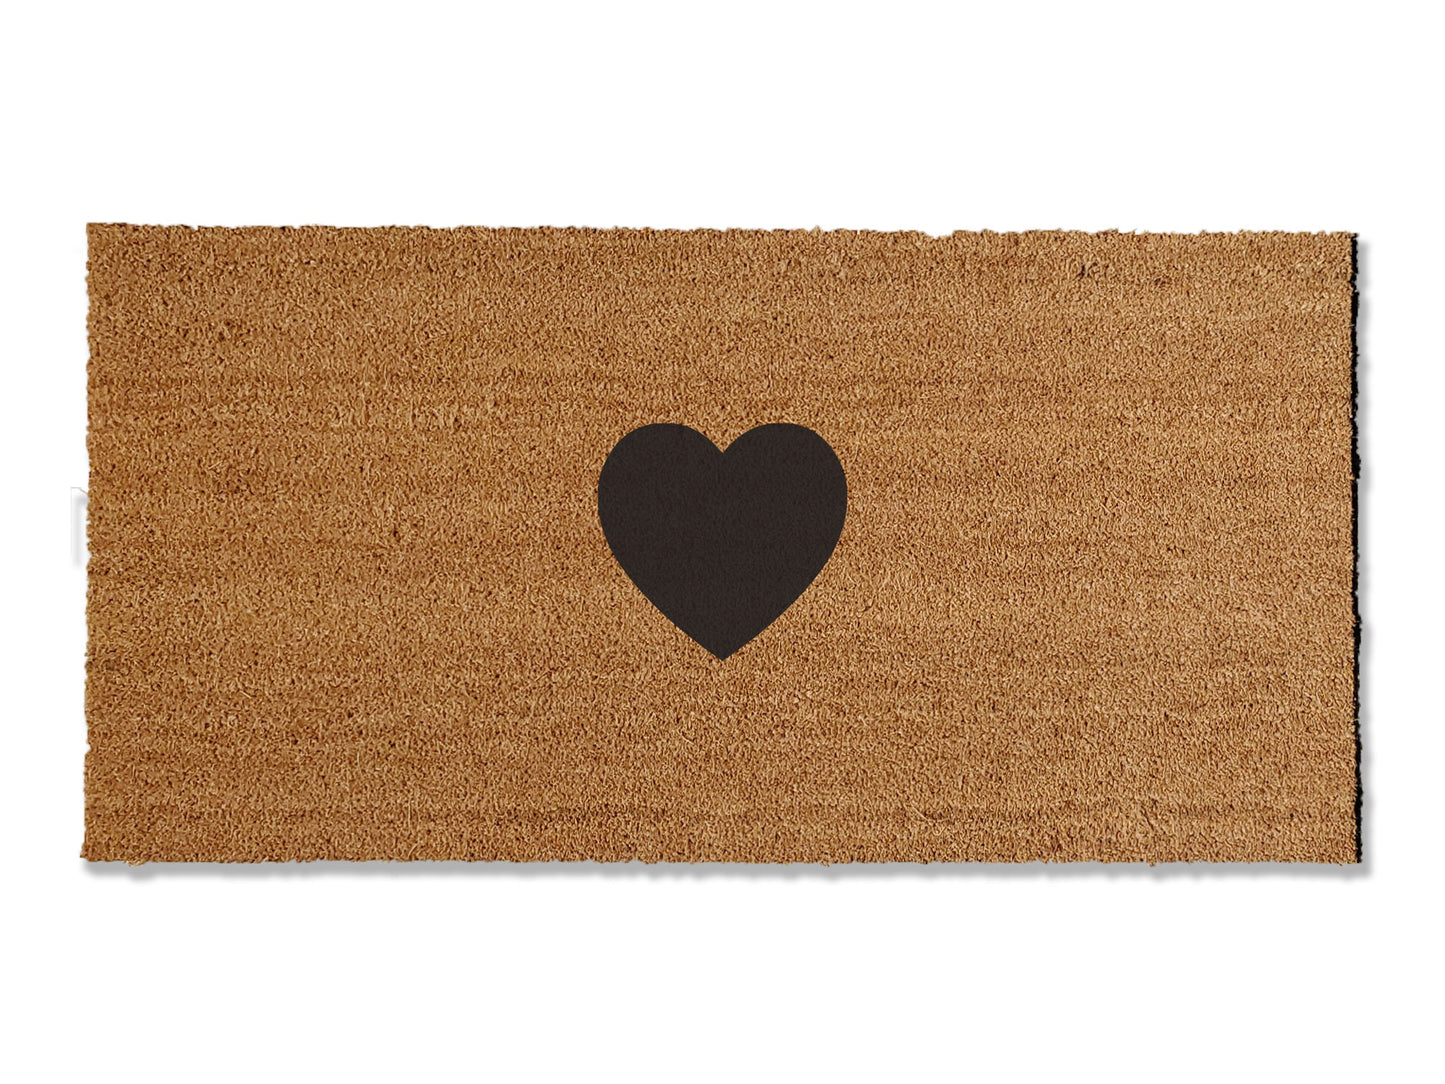 Embrace year-round warmth with our coir doormat featuring a heart design, available in multiple sizes and colors. Perfect for everyday use and a delightful addition to Valentine's Day, this unique mat is a charming way to spread love and welcome guests with heartwarming style.